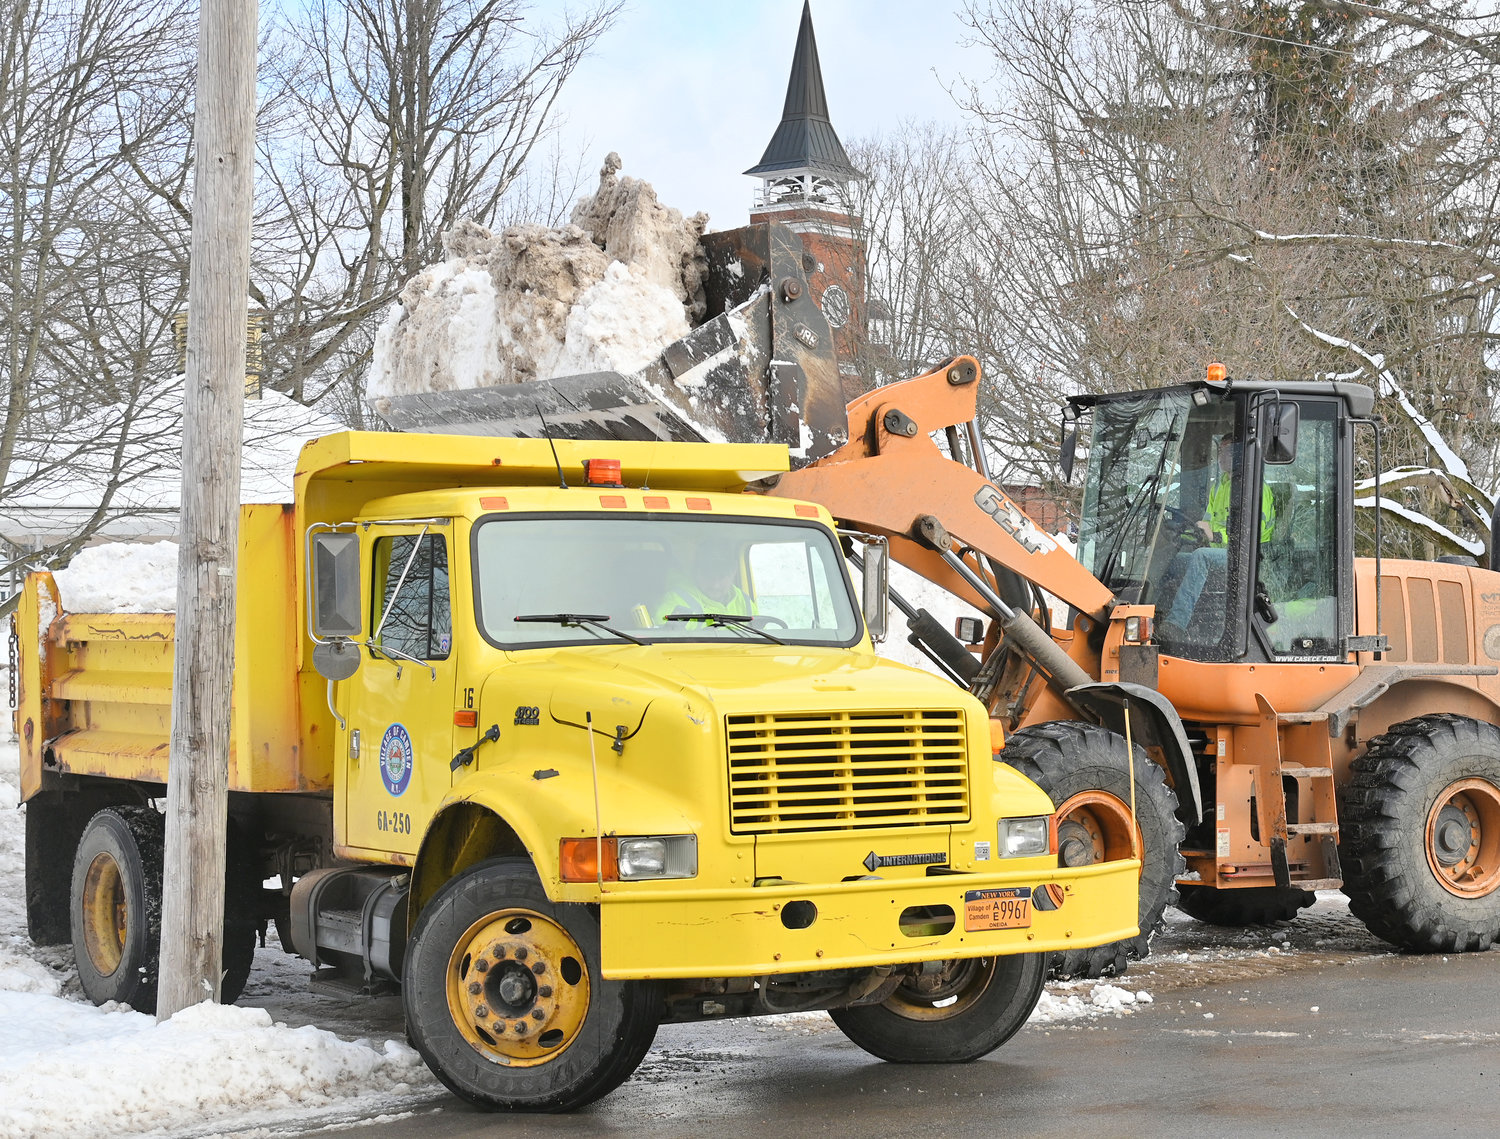 MAKING ROOM — Village of Camden employee Alex Gerrard uses a front loader to dump snow into the back of a dump truck driven by co-worker Jeremy Angel on Friday. The two were removing huge piles of snow in the village to make room for additional snow expected Sunday and Monday from Winter Storm Izzy.